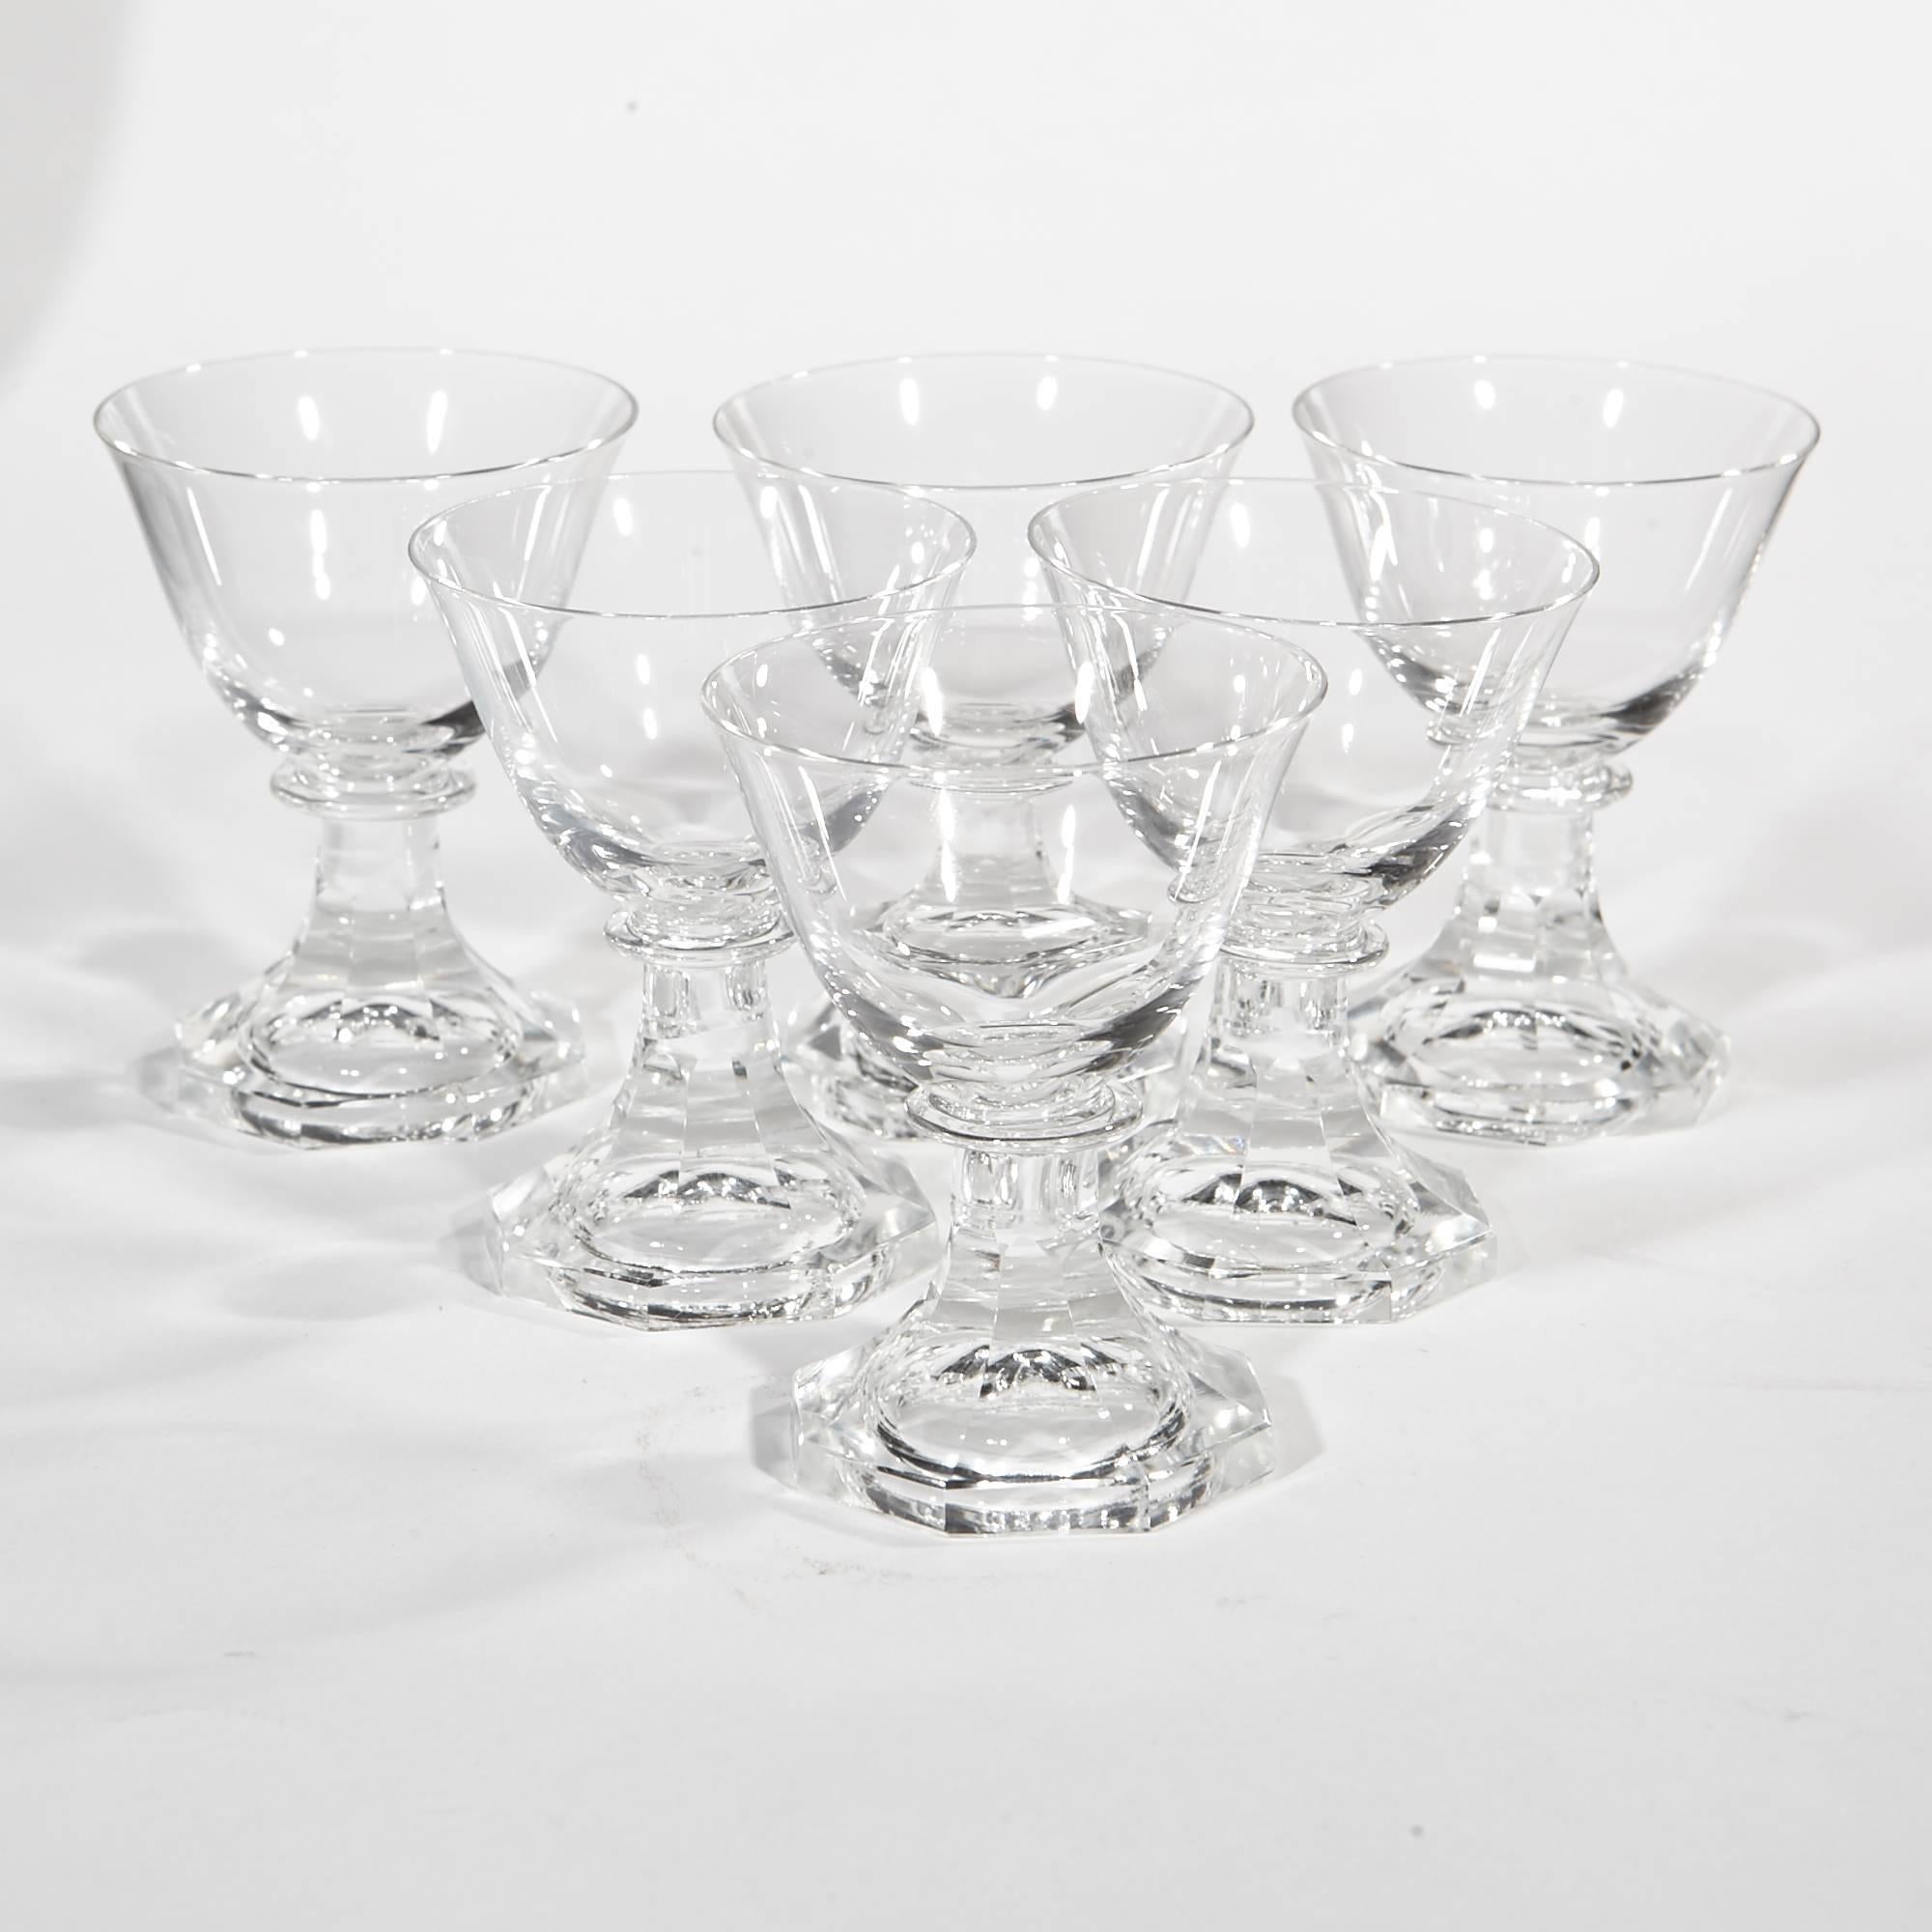 Scandinavian Modern Orrefors Crystal Stems in the Seaford Pattern, 45 Pieces For Sale